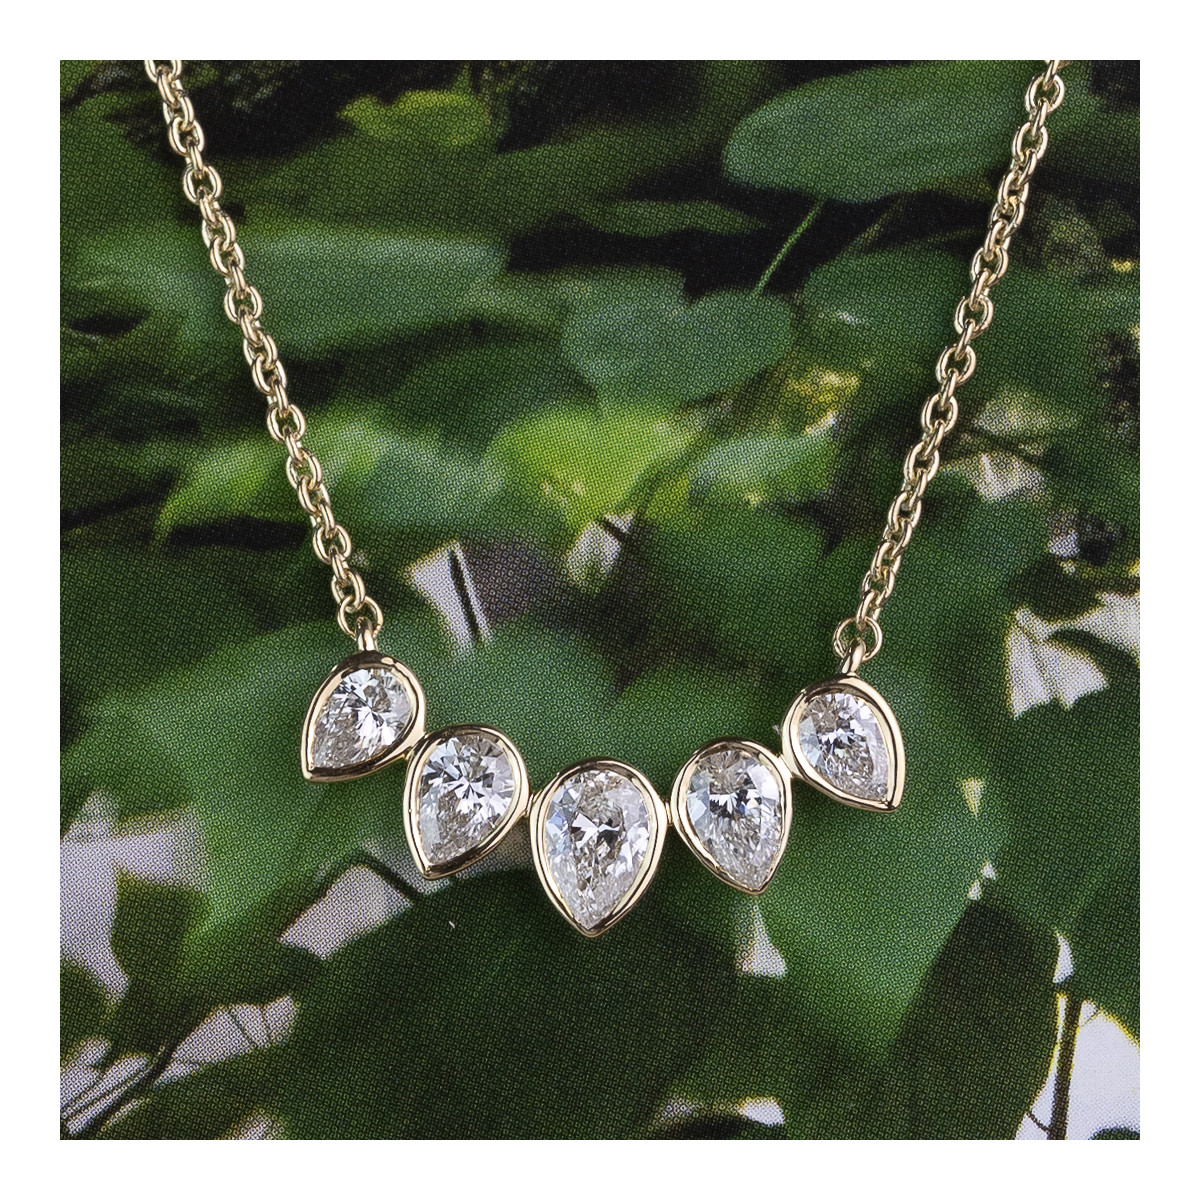 YELLOW GOLD NECKLACE WITH DIAMOND PETALS